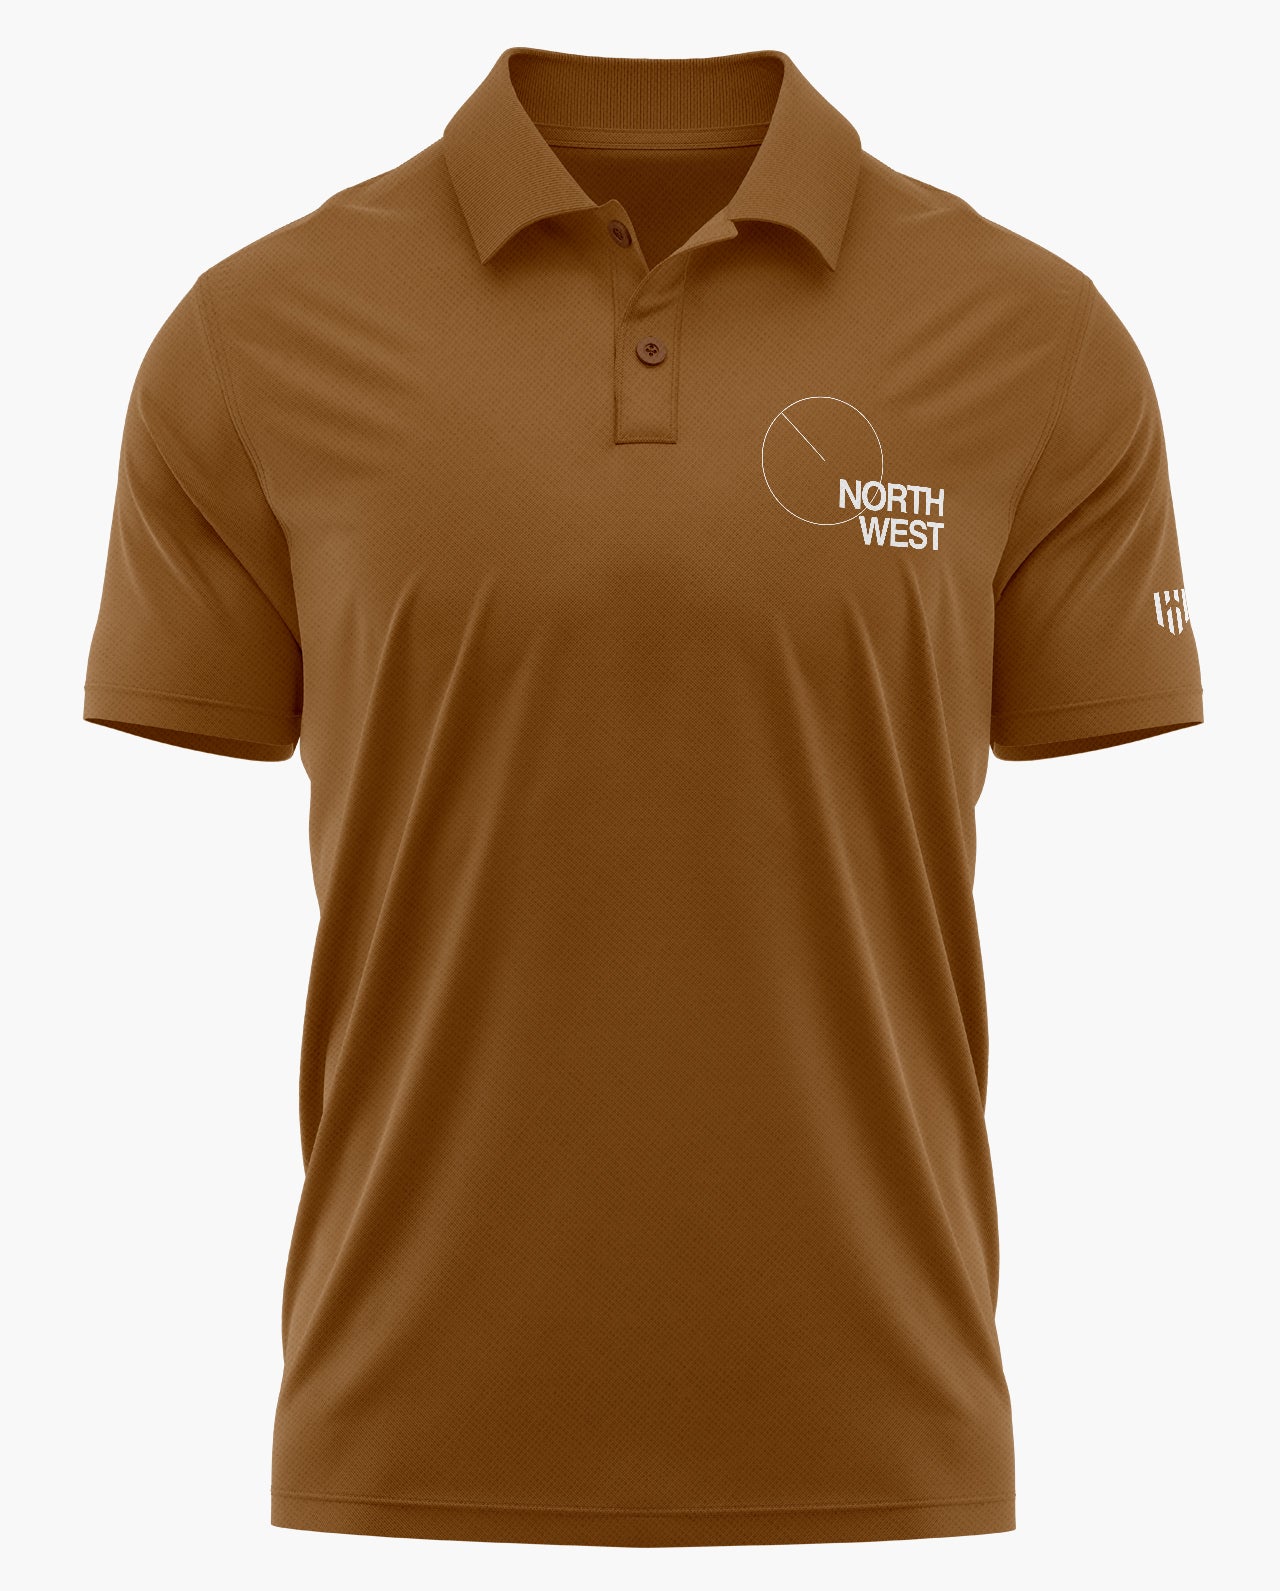 Direction North West Polo T-Shirt